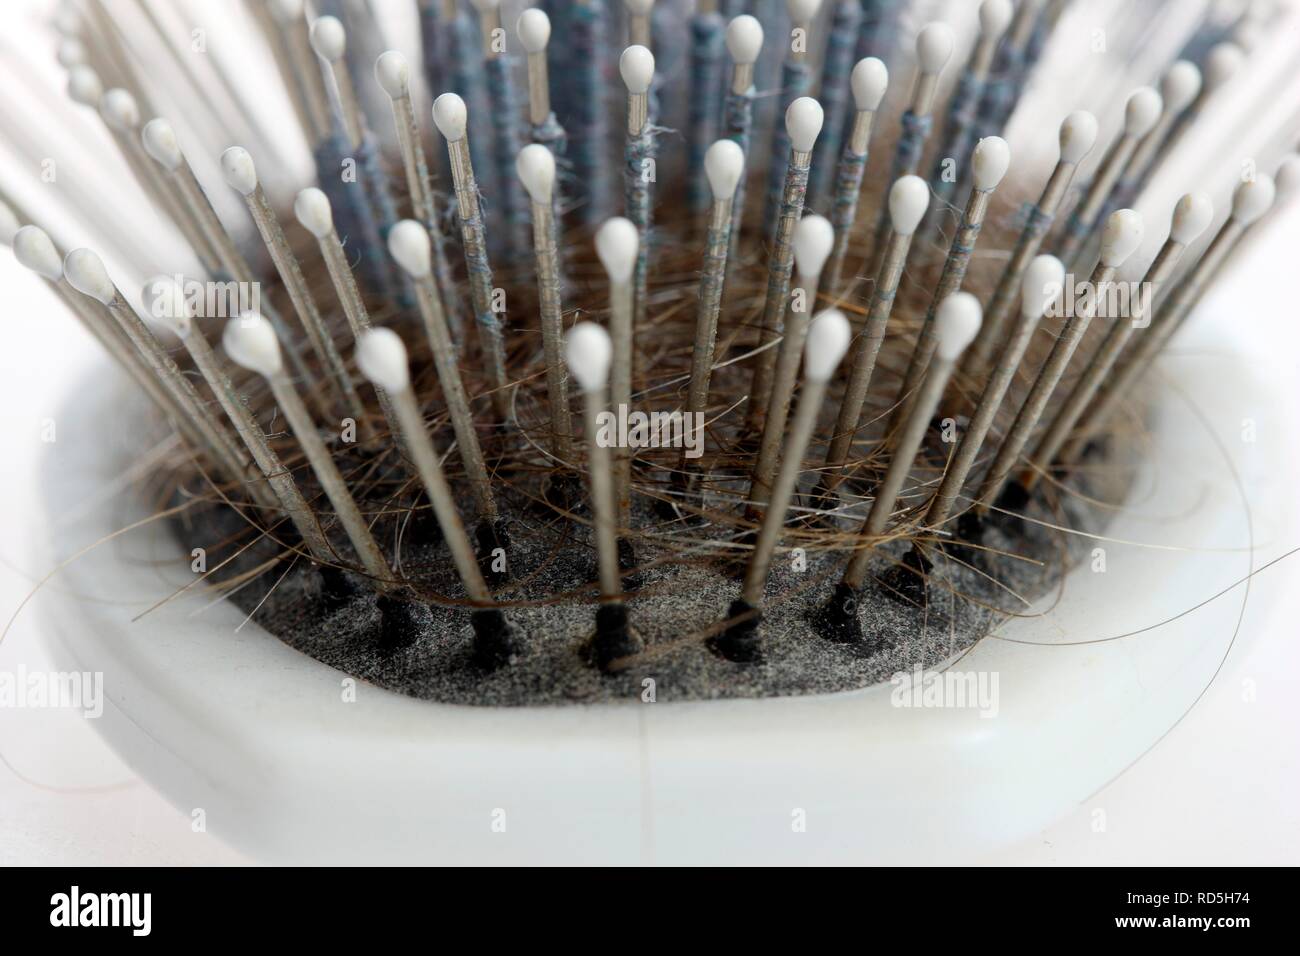 Hair brush with lots of hairs and fluff between the bristles Stock Photo